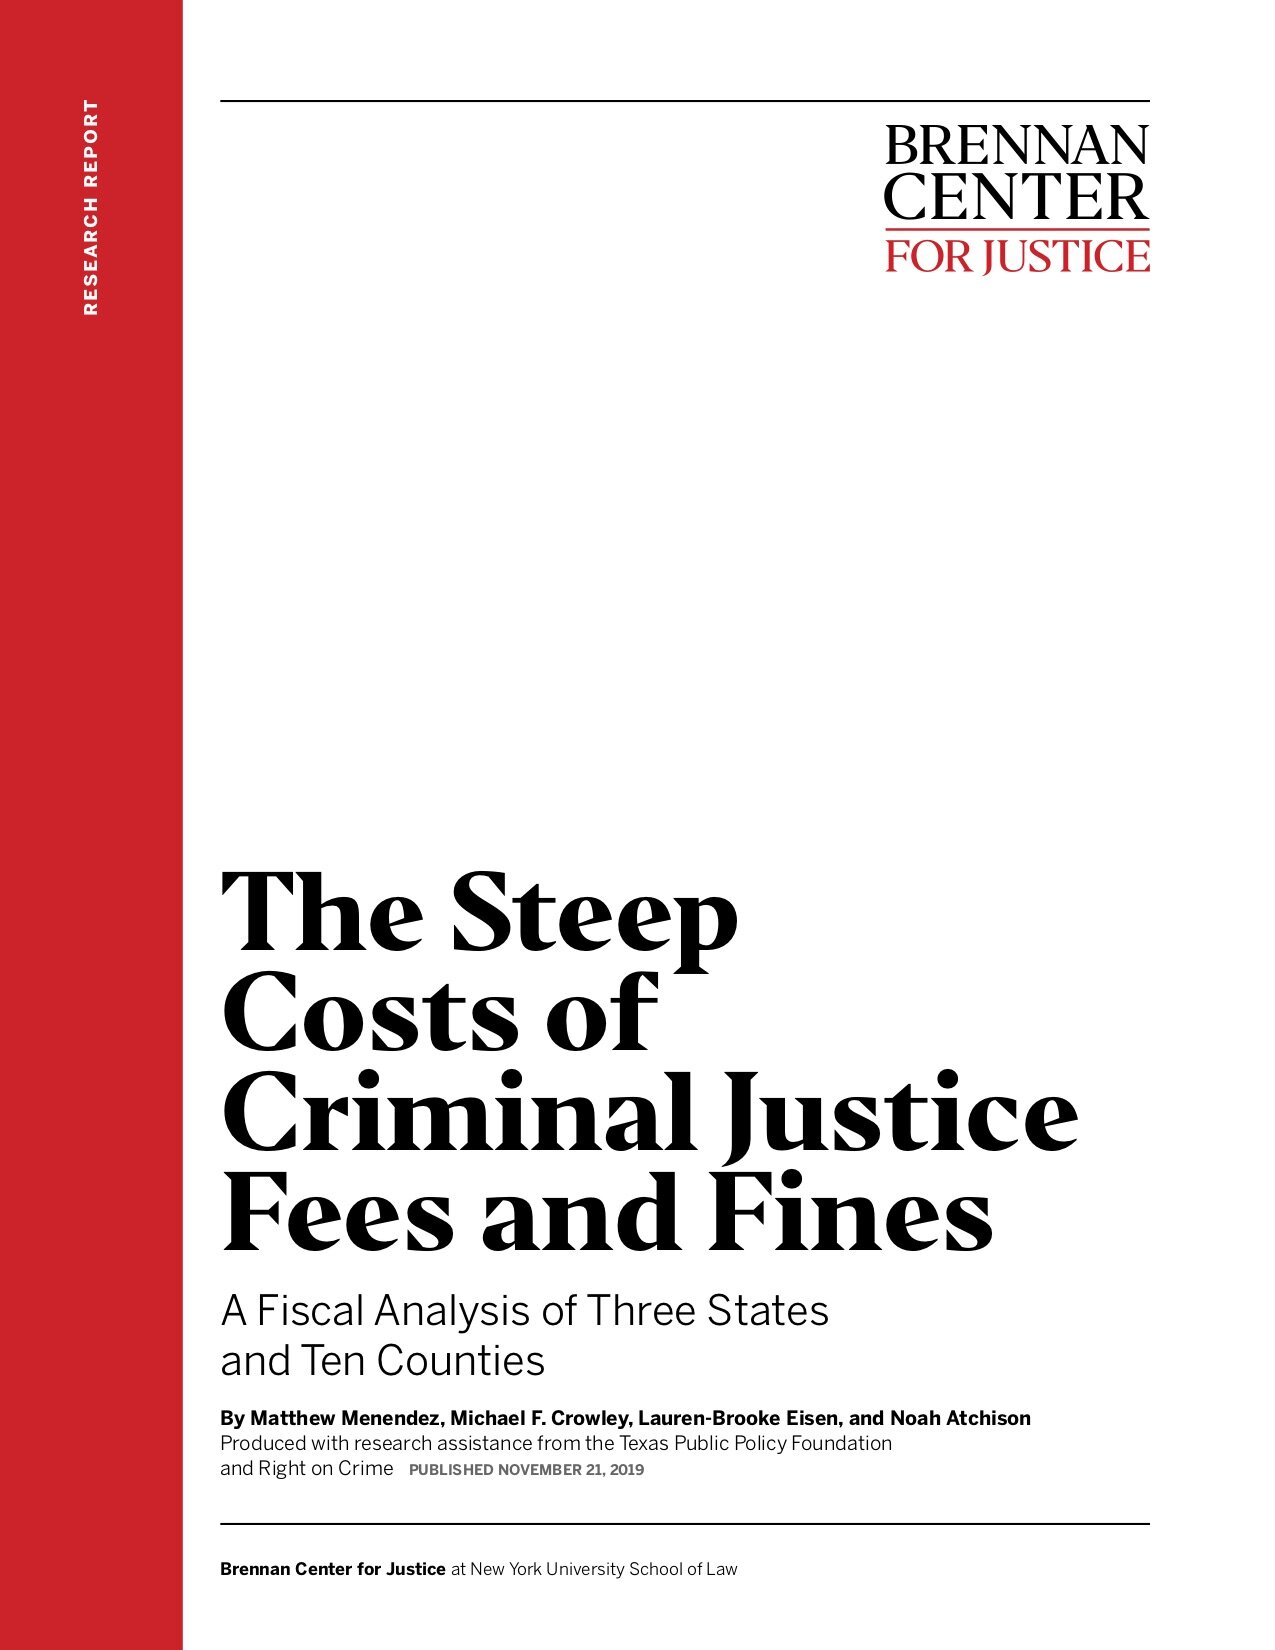 The Steep Costs of Criminal Justice Fees and Fines